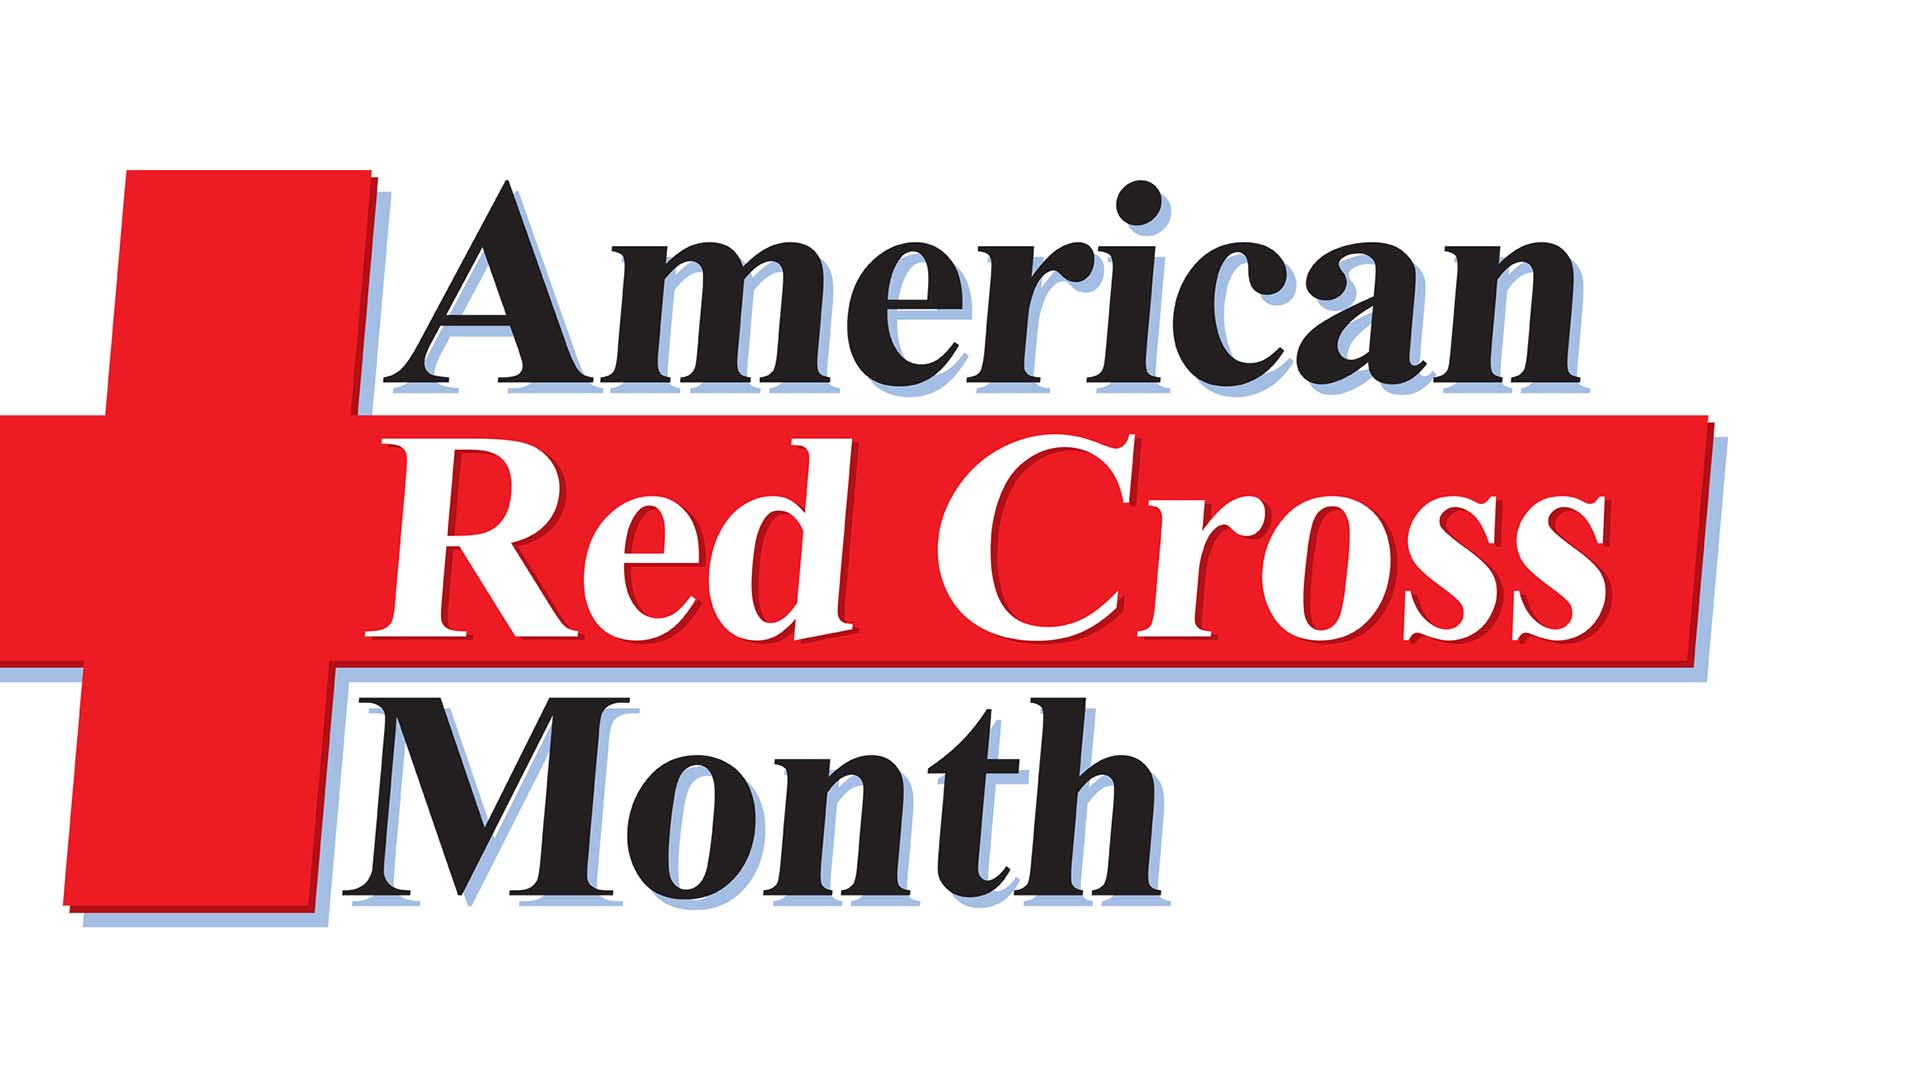 American Red Cross month spelt out with a cross on the left side of the graphic. the horizontal cross is extending across the graphic.